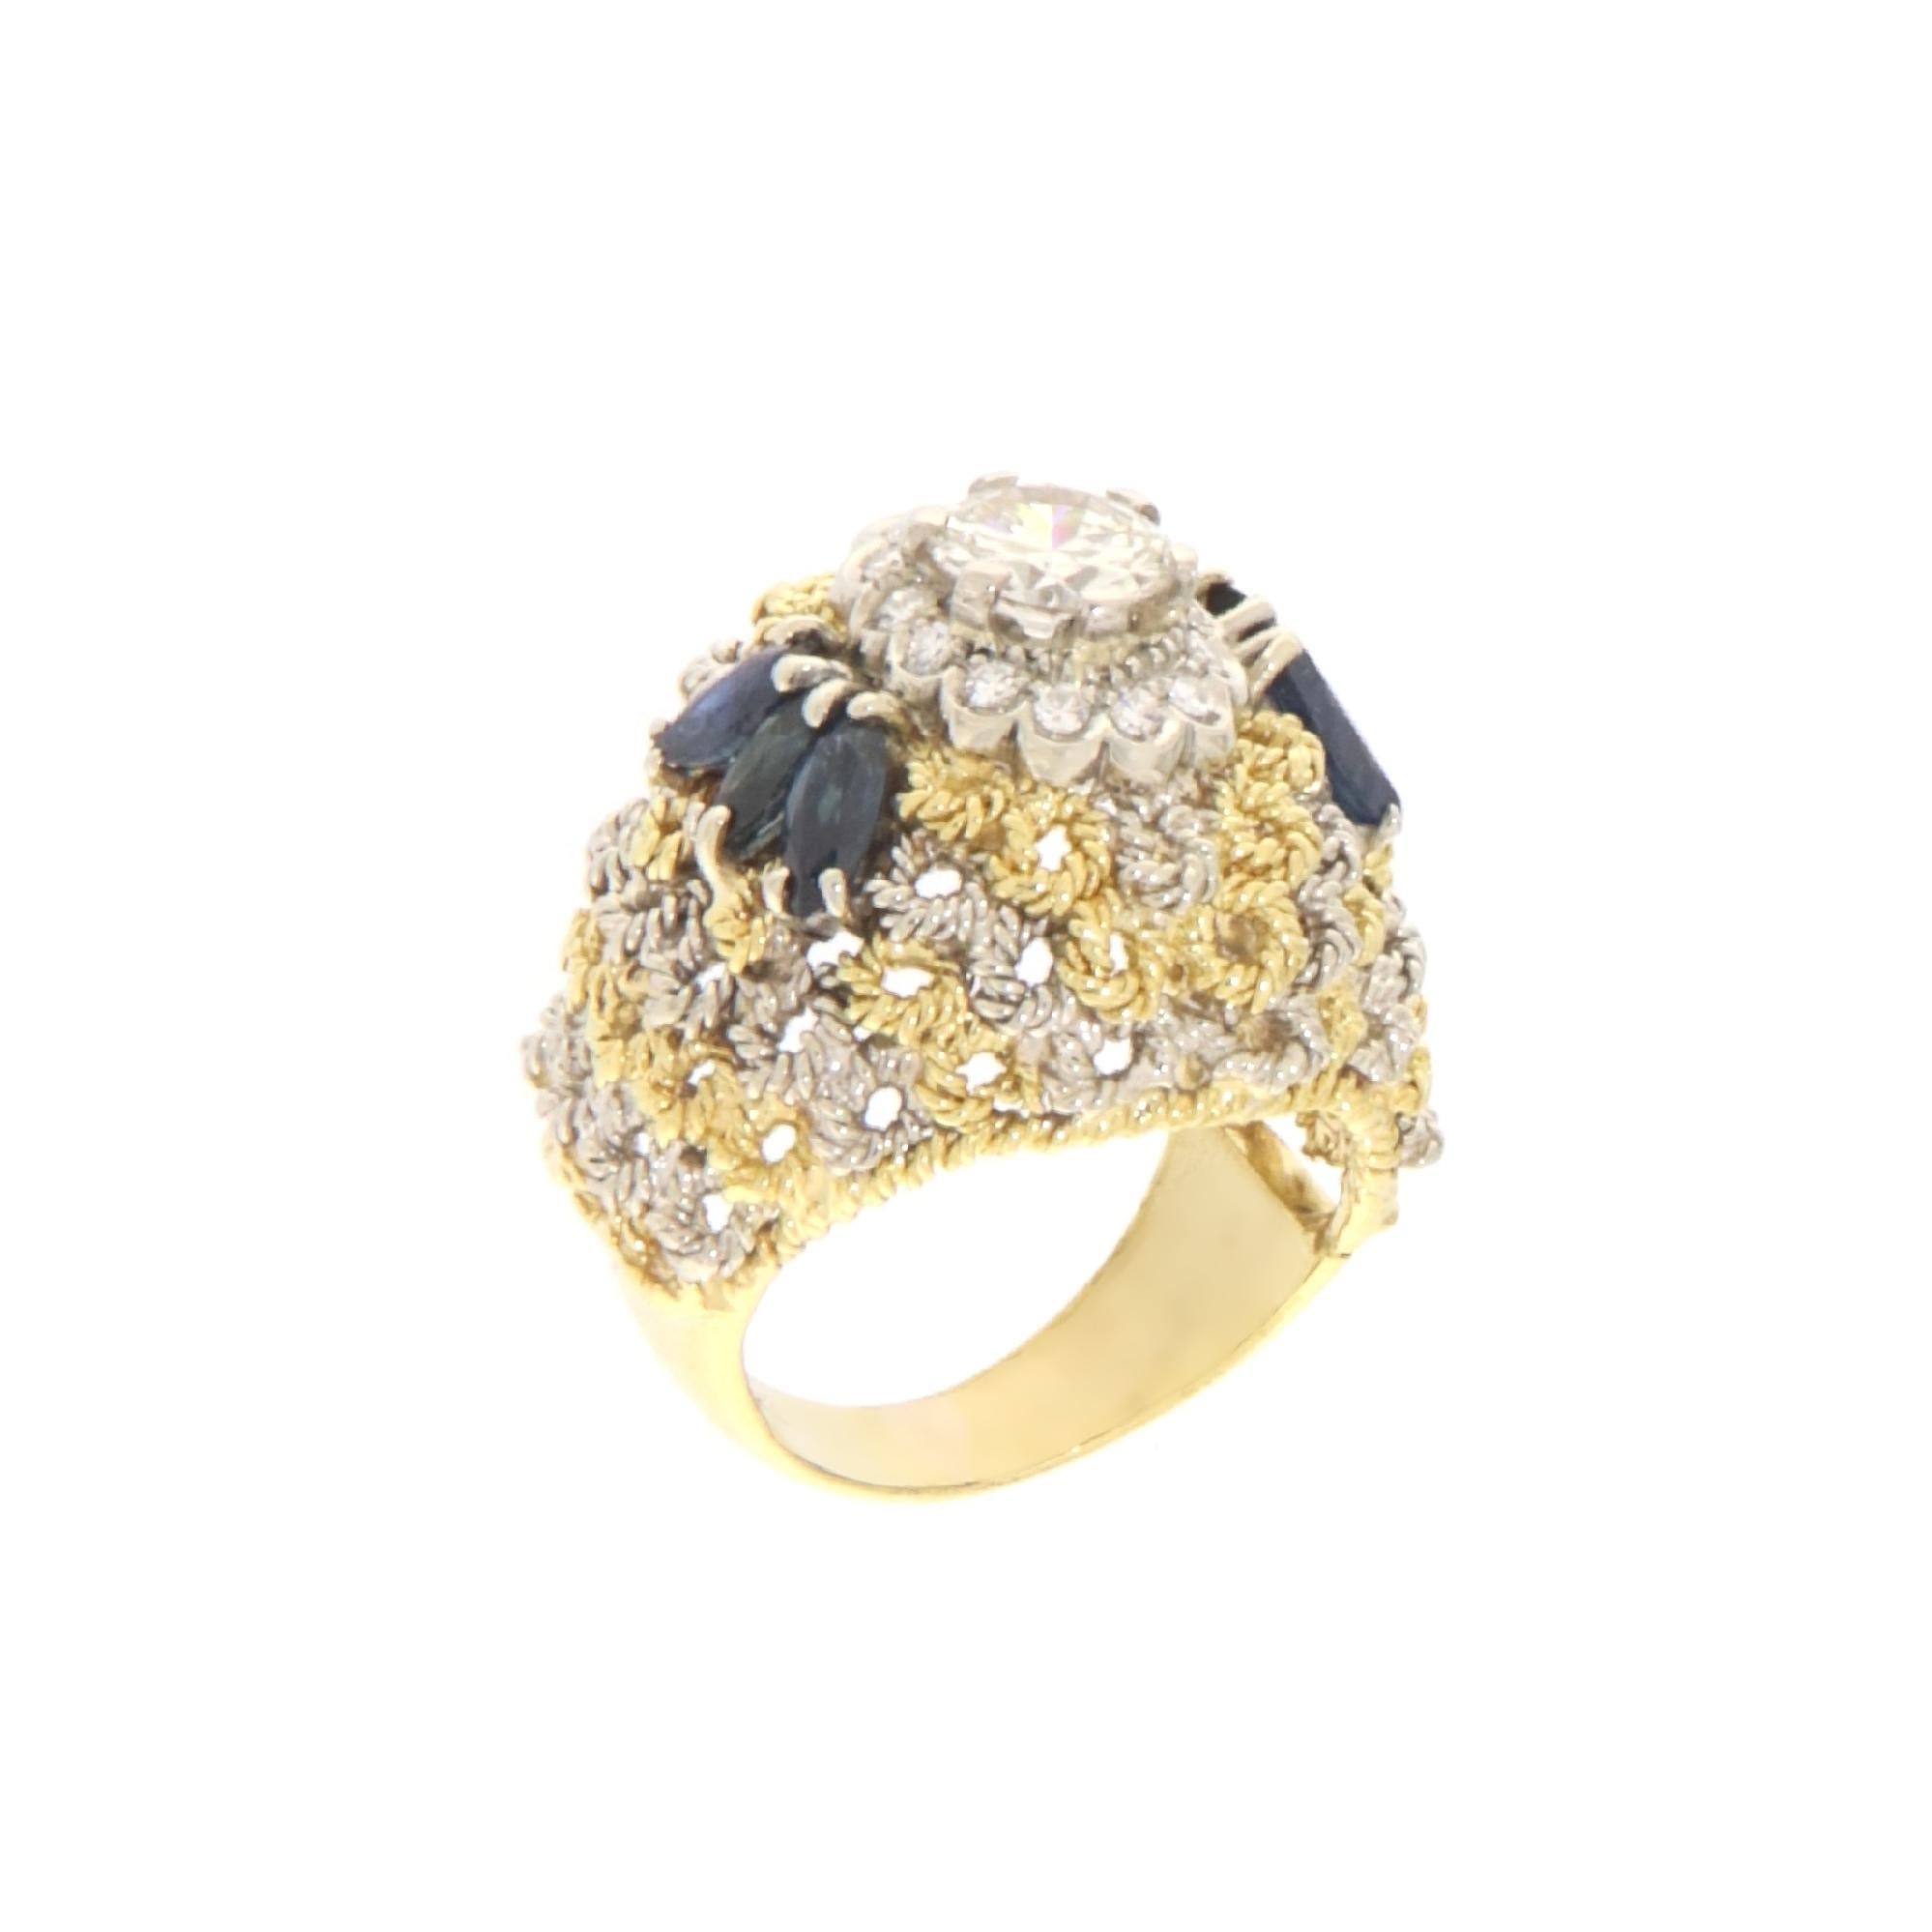 This exquisite ring is a fine example of luxury and elegance, crafted from 18-karat white and yellow gold. It features a central brilliant-cut diamond weighing 0.84 carats, surrounded by a halo of smaller diamonds that enhance its luminous appeal.